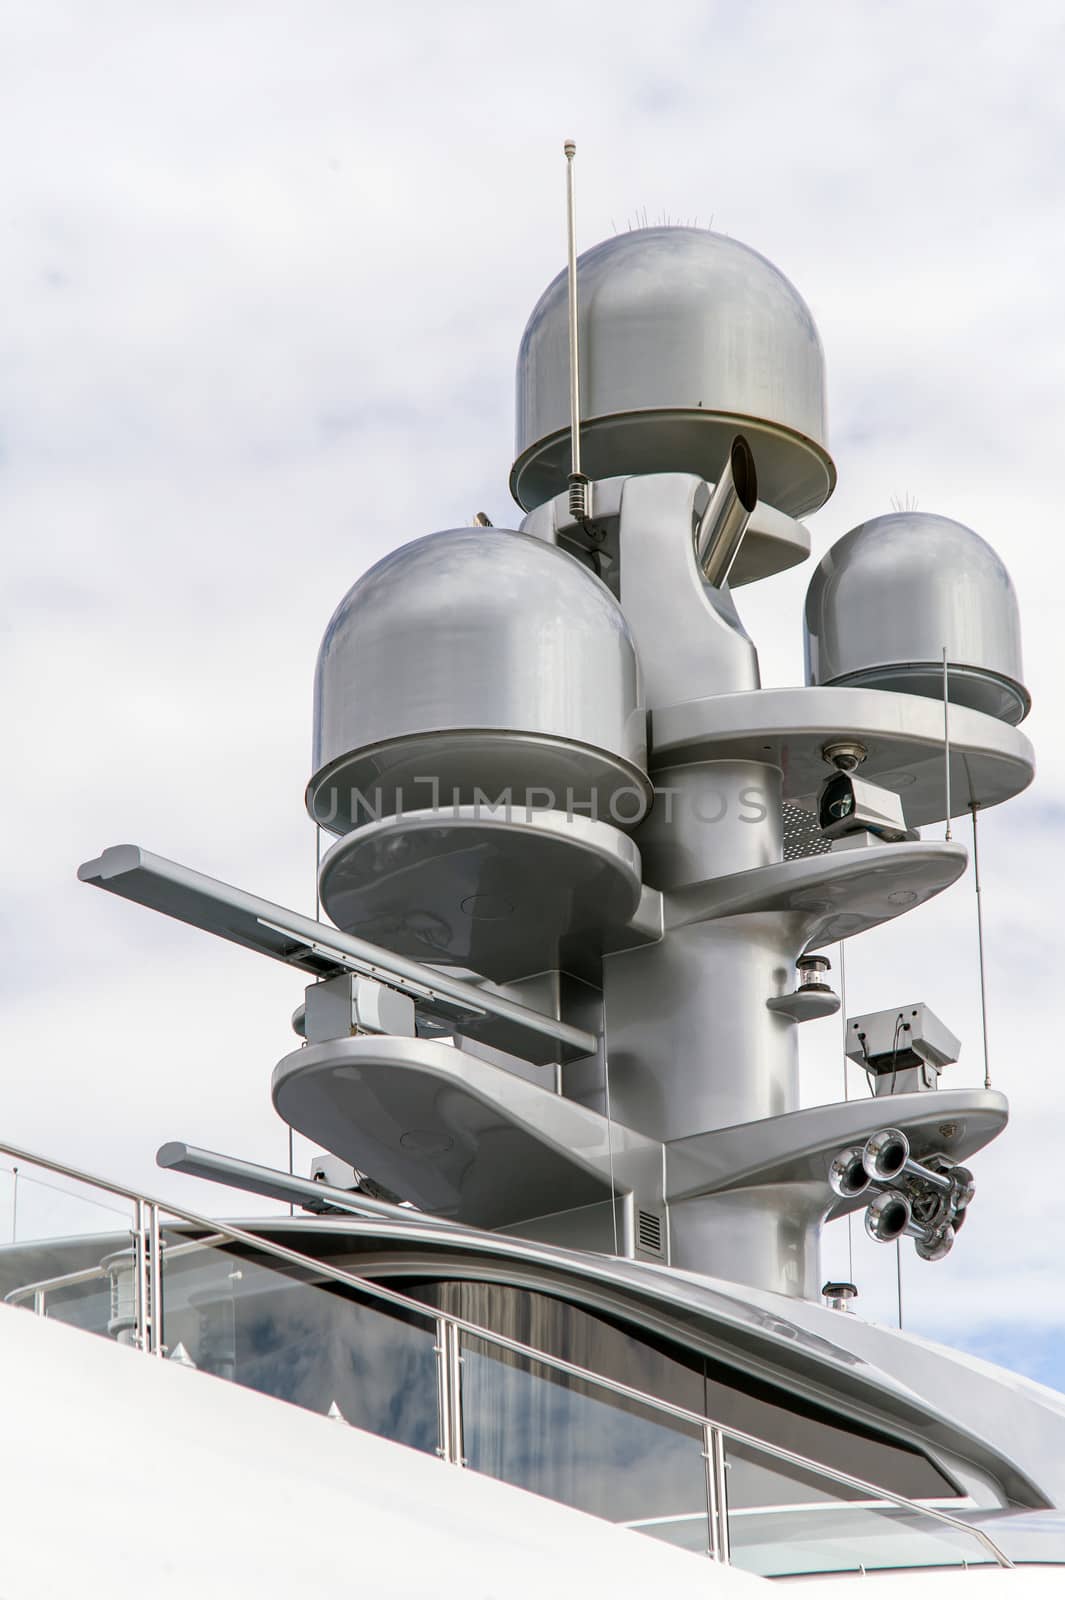 Radar and communication tower on a yacht by giovannicaito